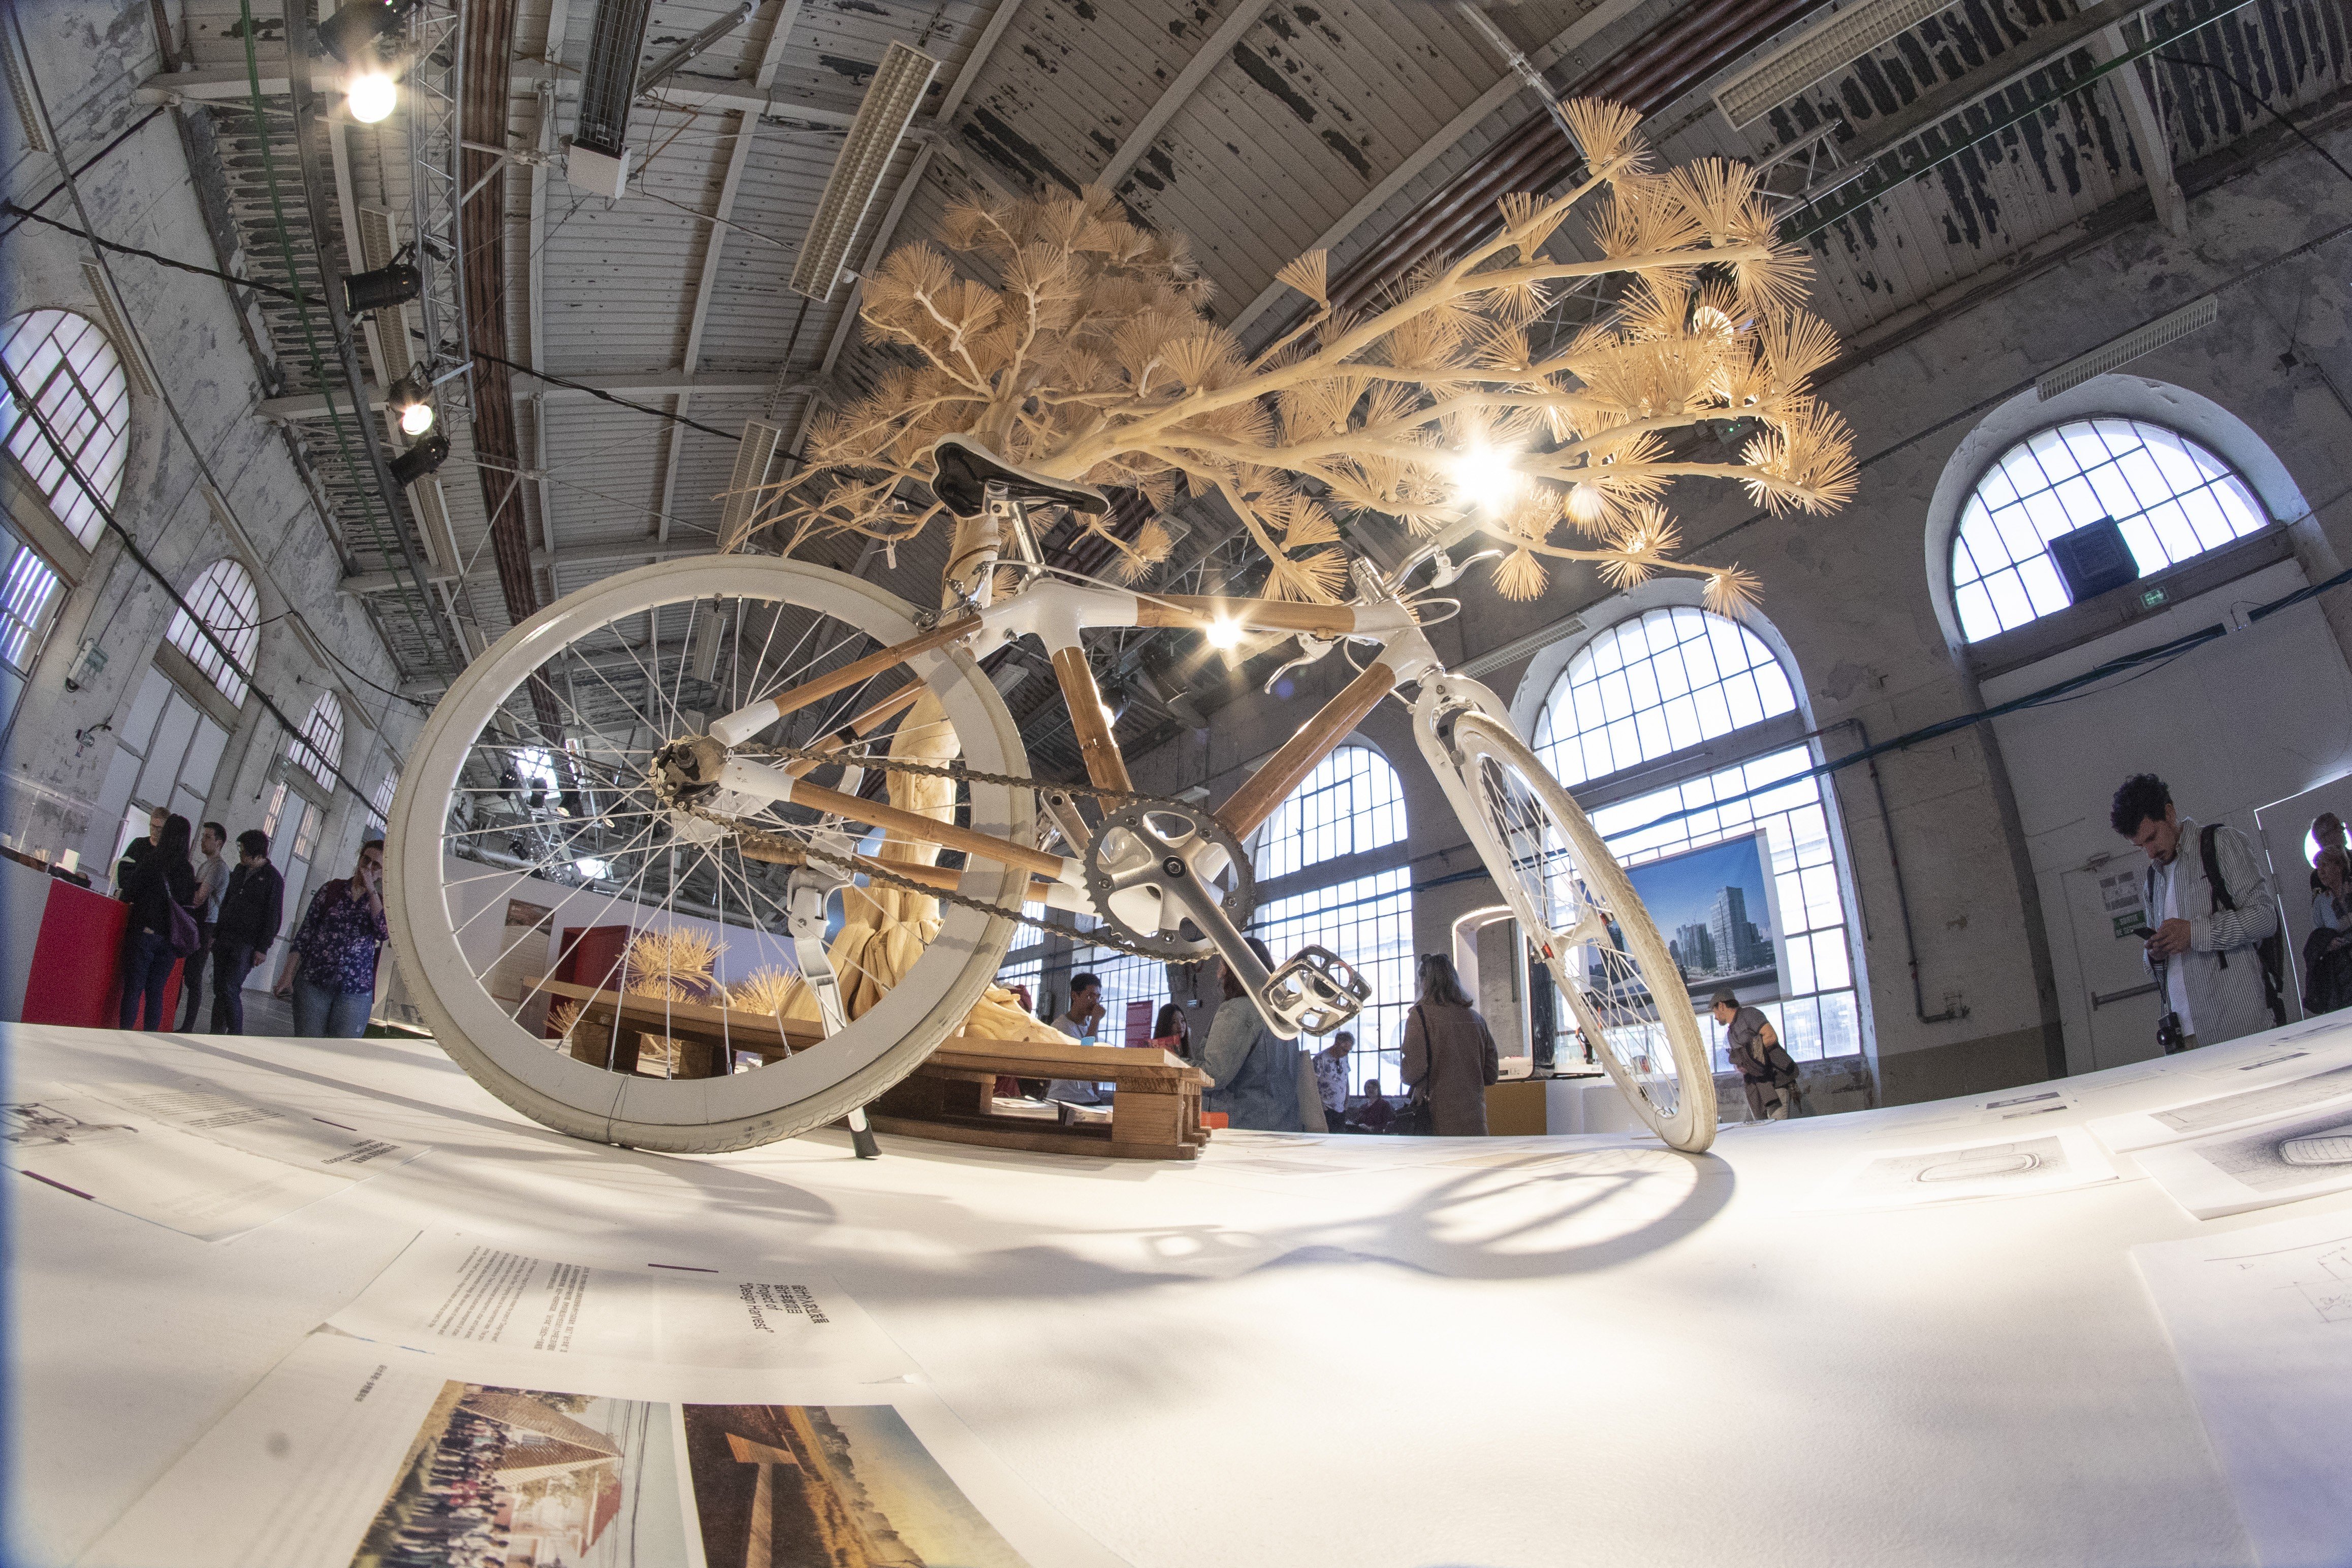 The Chinese exhibit at the St Étienne International Design Biennial in France covers 70 years of design evolution in China, with a focus on functional objects such as this bicycle. Photo: Pierre Grasset